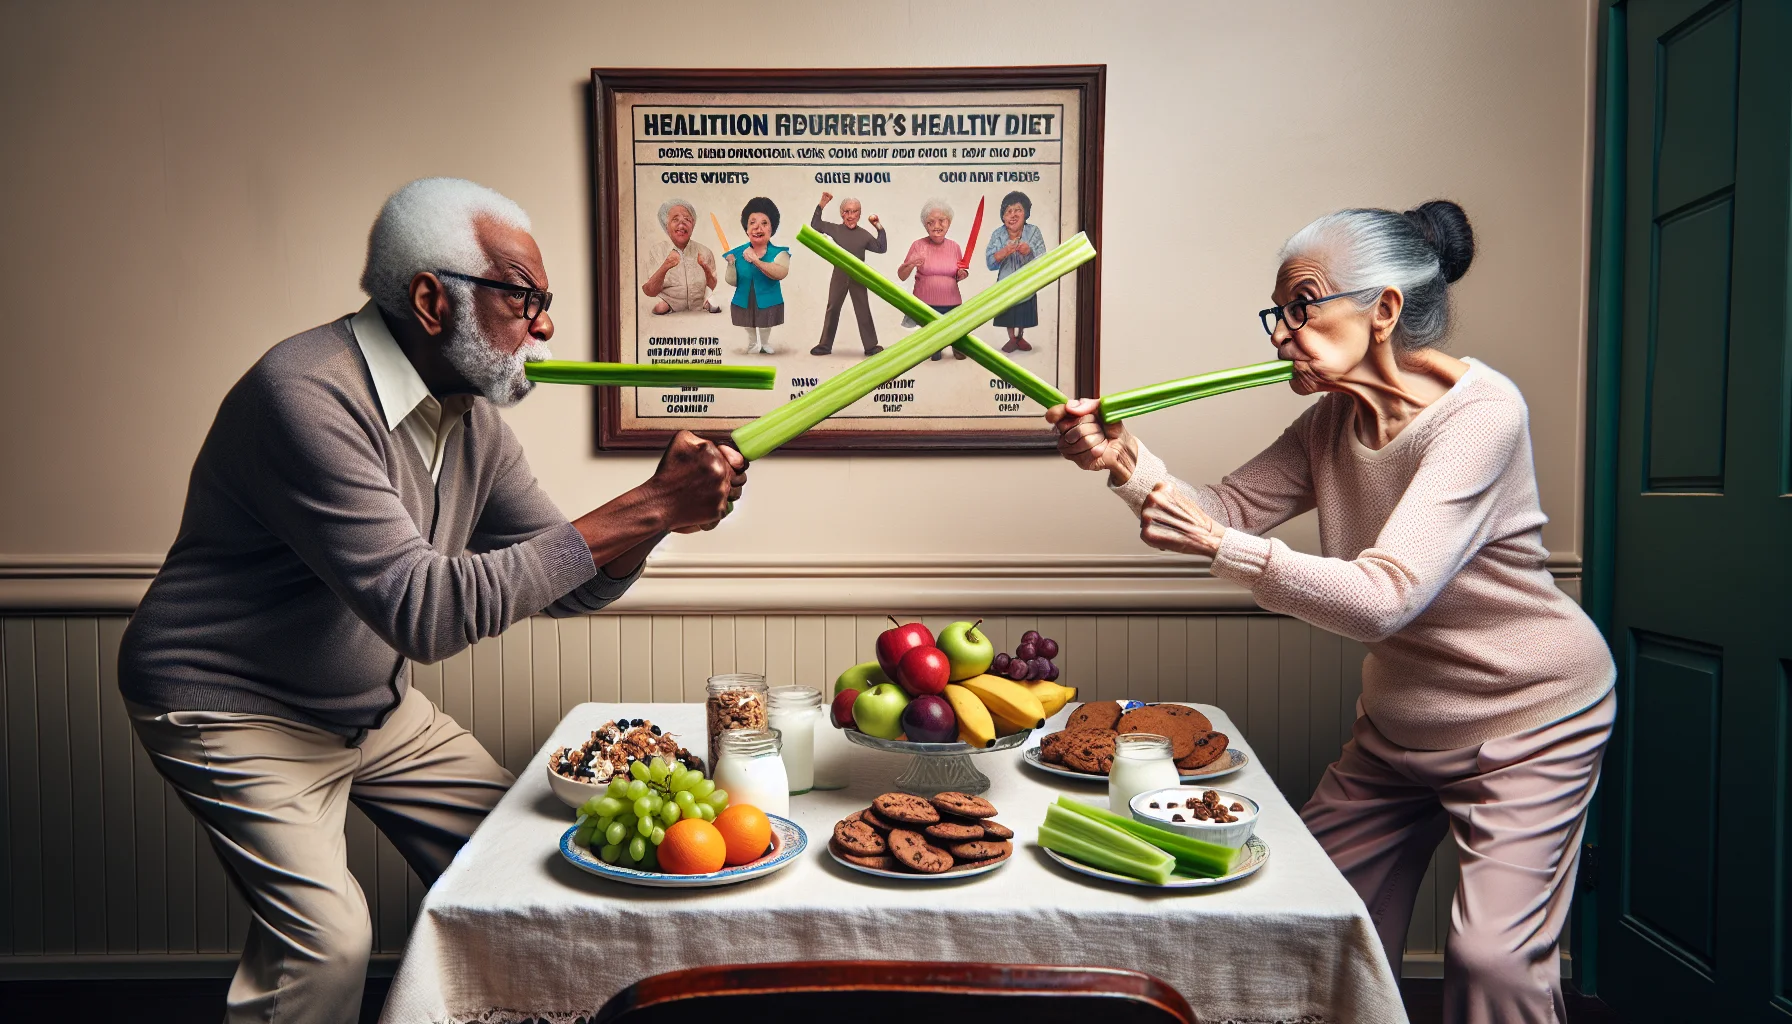 Humorous portrayal of an afternoon snack setting involving senior citizens. One elderly man of Black descent and one elderly woman of Hispanic descent, both with determined expressions, are engaged in a playful celery stick dual, posing like sword fighters. They are surrounded by a table filled with traditional healthy snacks such as fruits, yogurt, and granola. On one side, a platter of mouth-watering cookies and sweets is ignored. On the wall, there's a visibly ignored poster emphasizing the importance of a healthy diet. The scene blends realism with comedy while also presenting a motivational picture of healthy eating in old age.